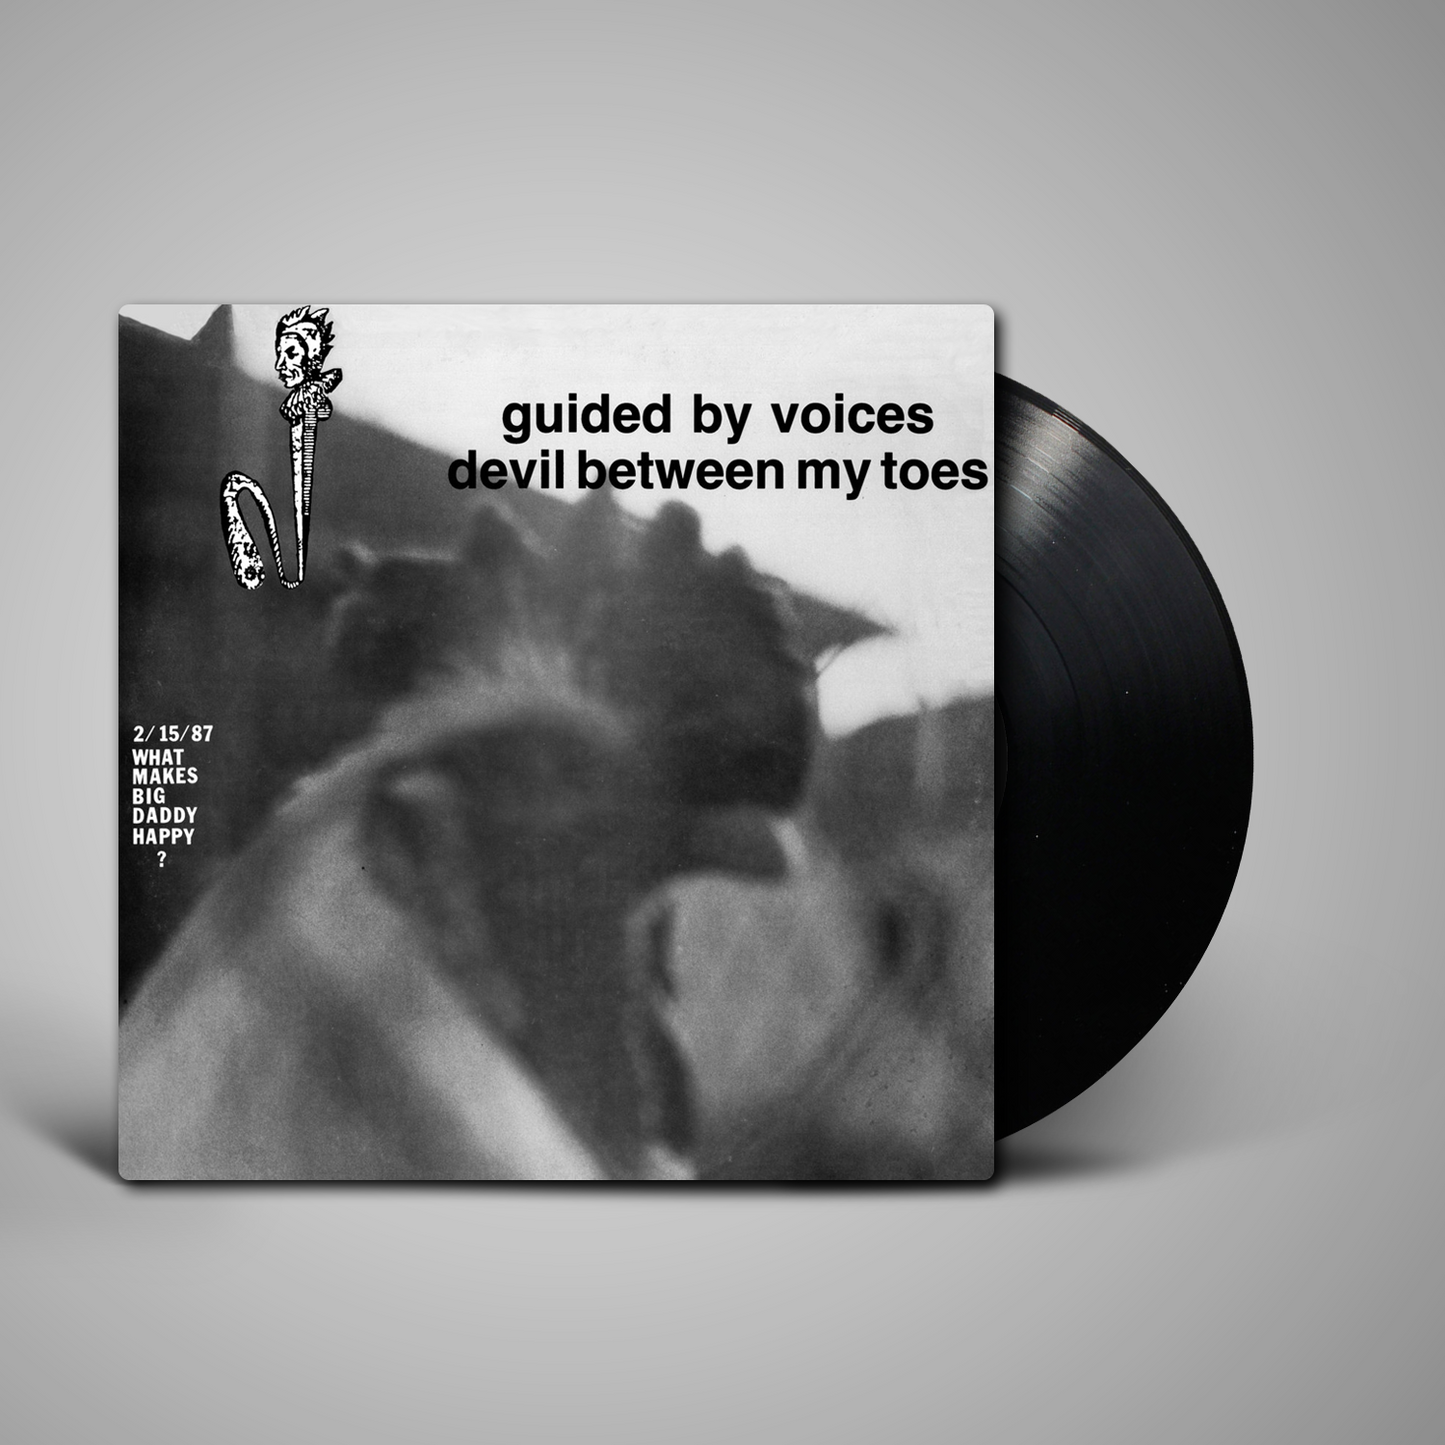 guided by voices vinyl